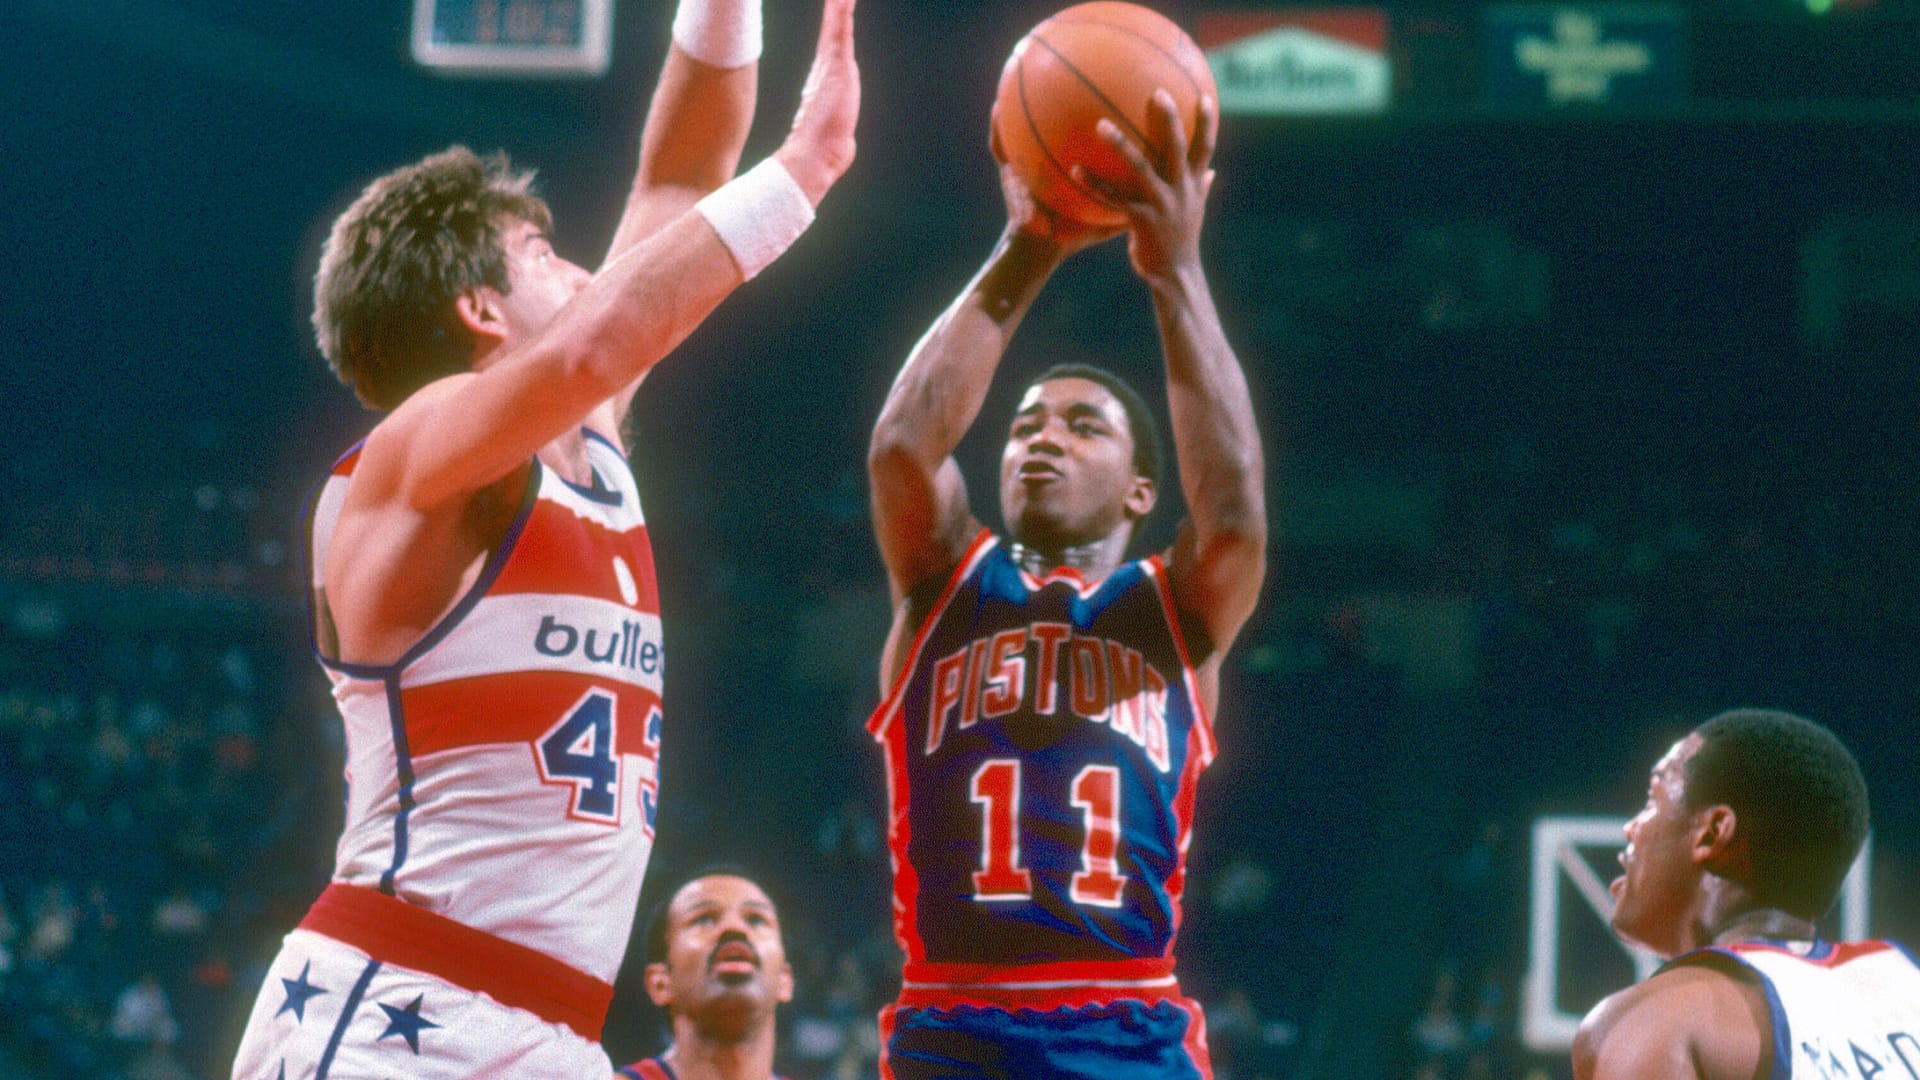 Isiah Thomas #11 of the Detroit Pistons shoots over Jeff Ruland #43 of the Washington Bullets during an NBA basketball game circa 1982 at The Capital Centre in Landover, Maryland.